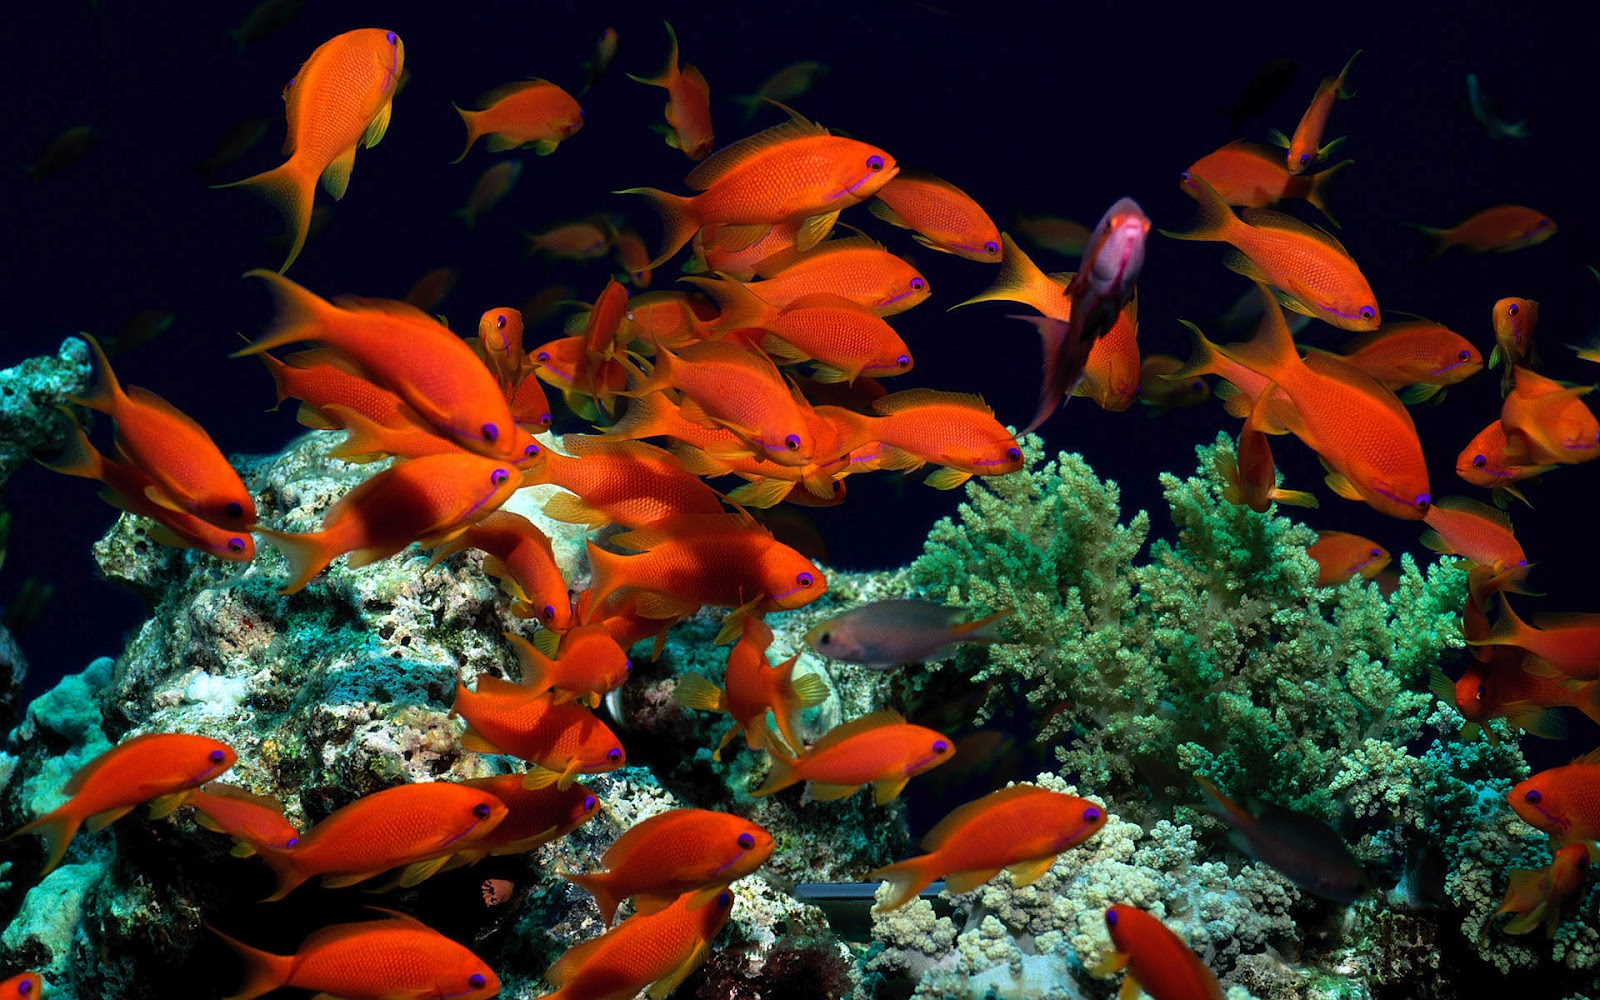 Live Fish Wallpaper - Orange Fish That Live In The Coral Reef - HD Wallpaper 